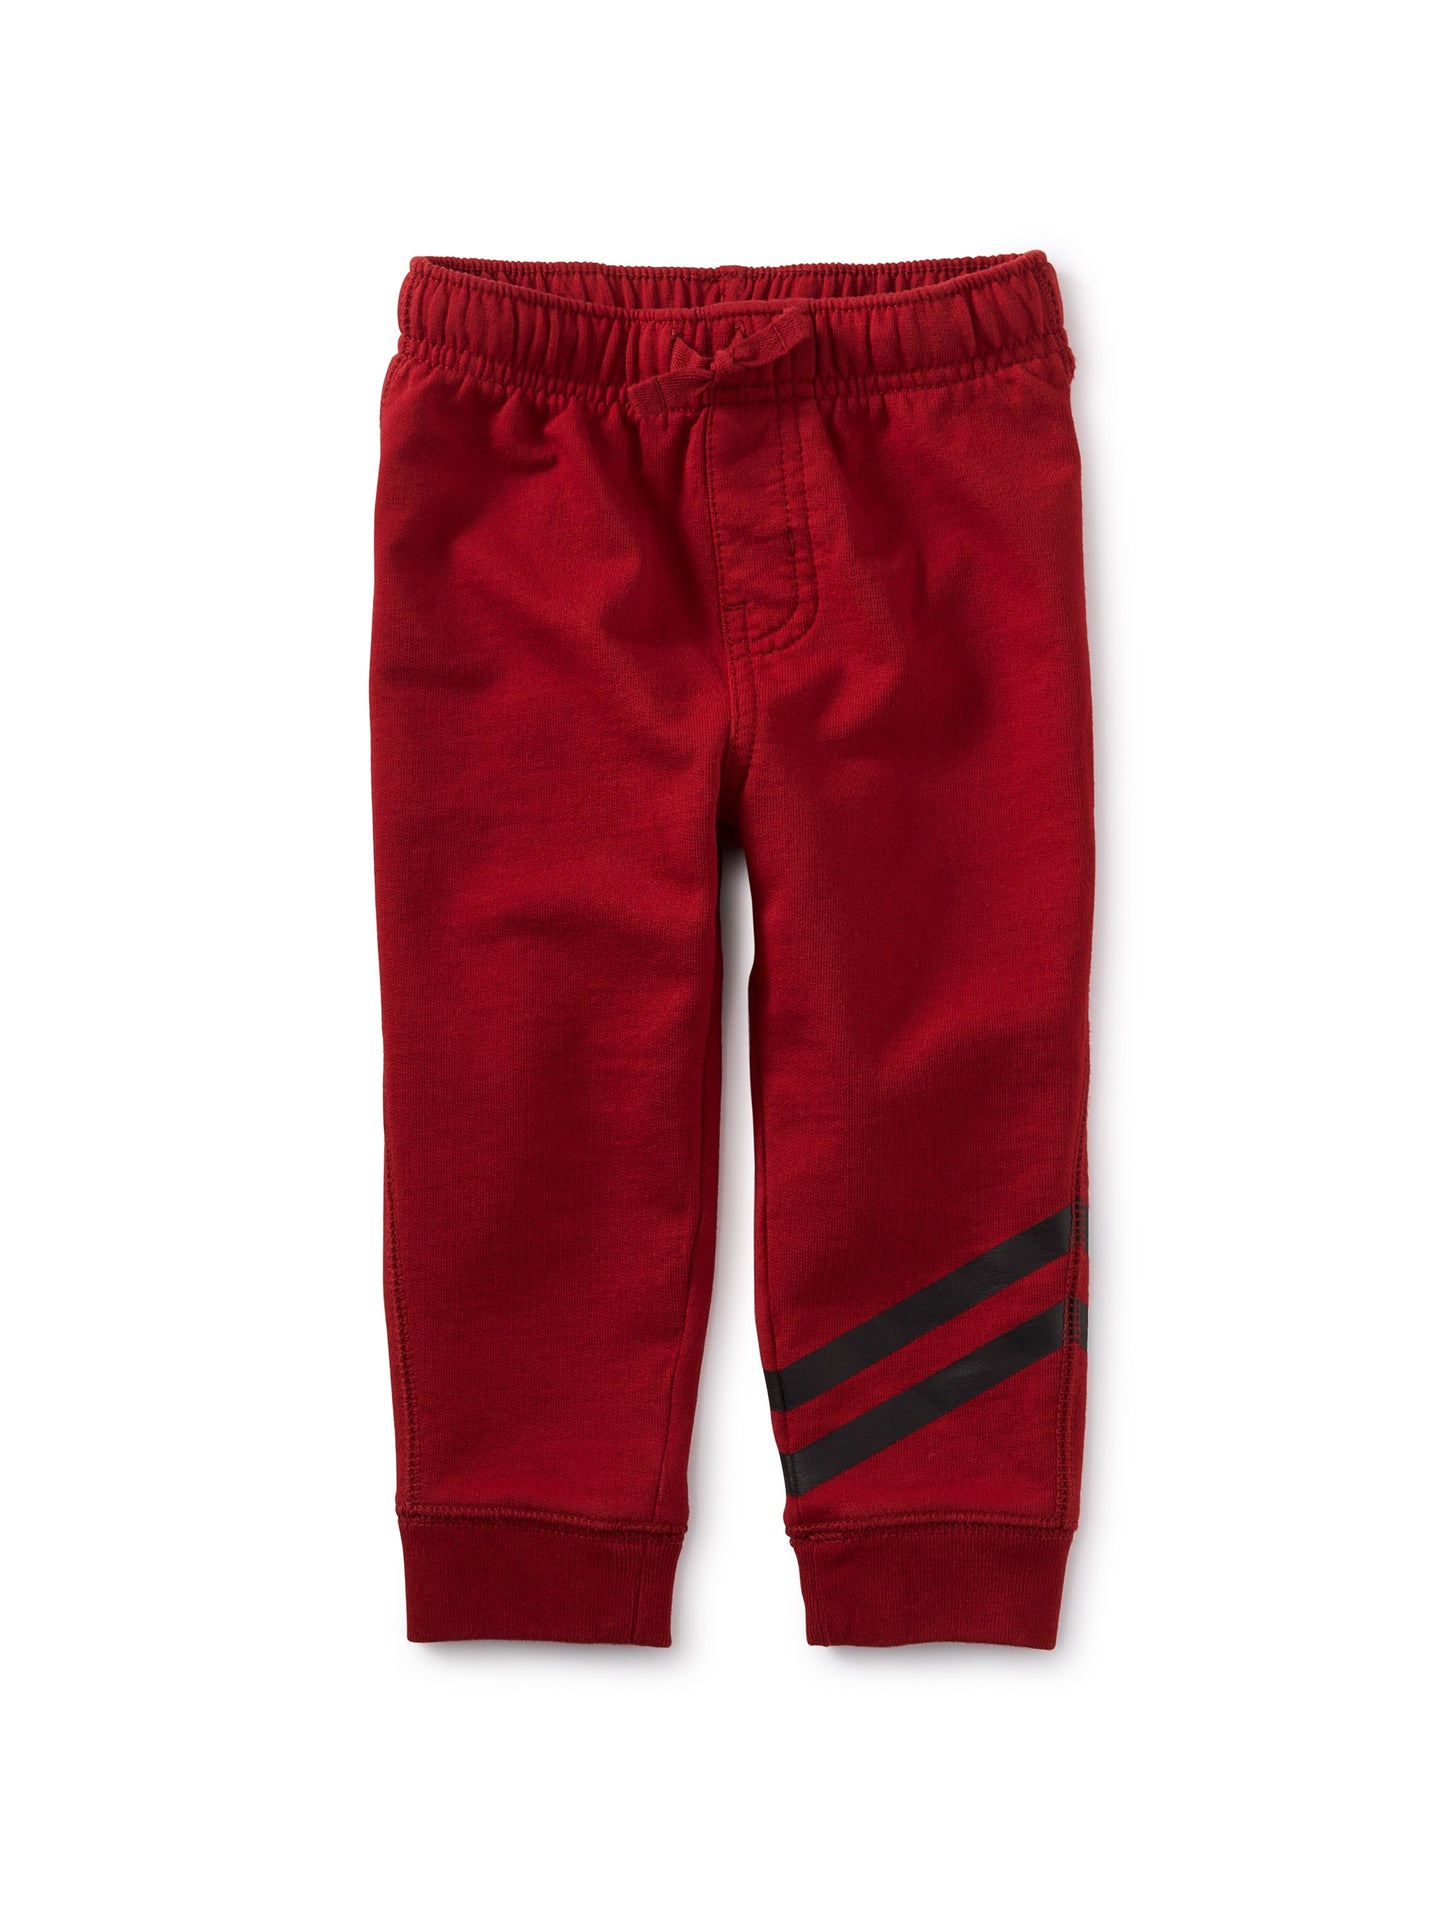 Tea Collection - Speedy Striped Baby Joggers - Red Wagon